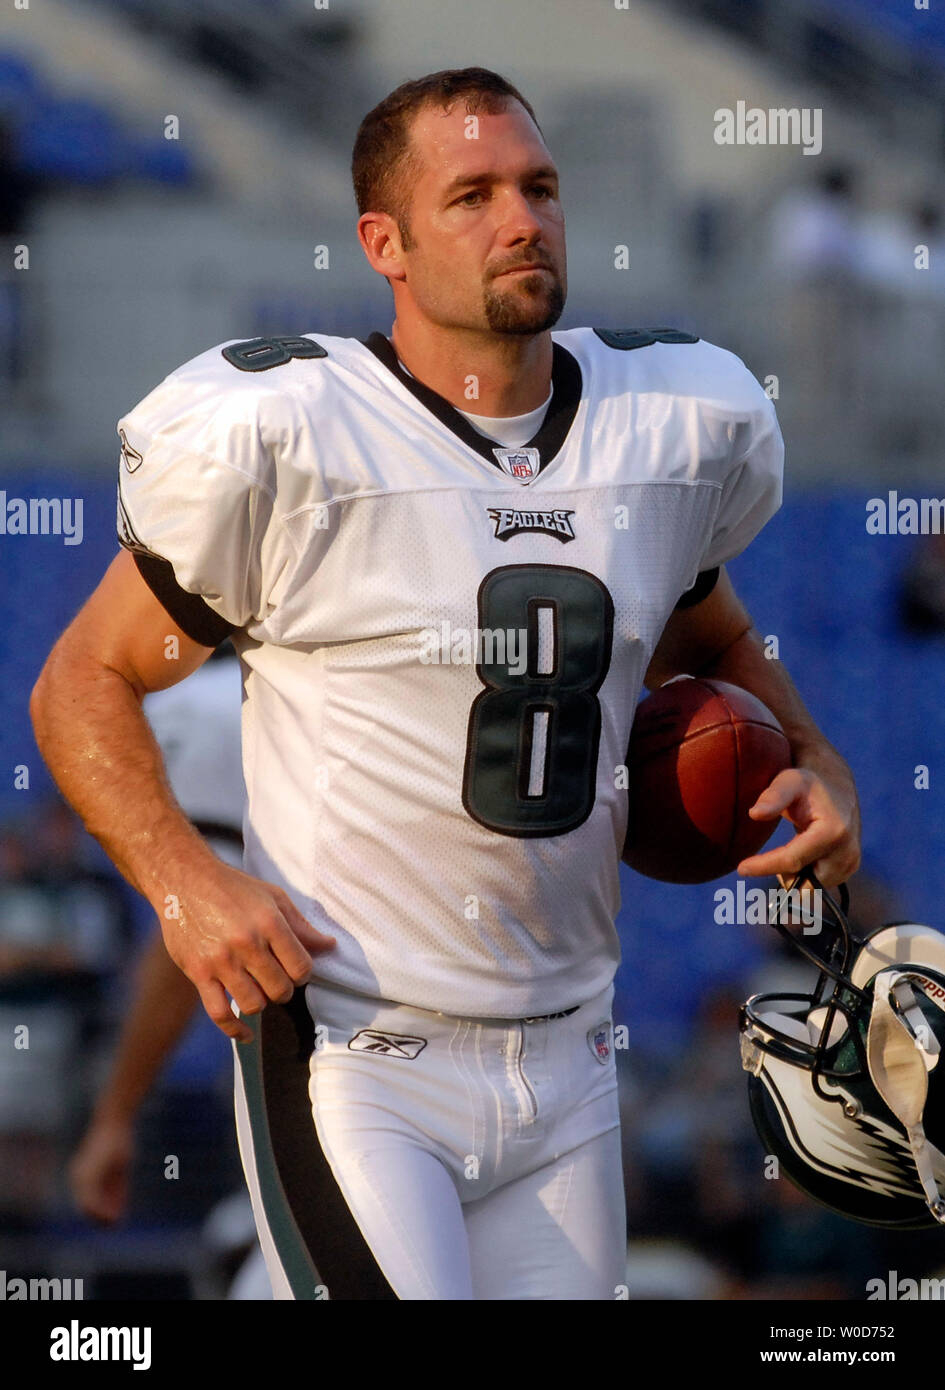 Philadelphia Eagles punter Dirk Johnson (8)warms up prior to the Eagles pre- season game against the Baltimore Ravens, at M & T Bank Stadium in  Baltimore, Maryland on August 17, 2006. (UPI Photo/Kevin